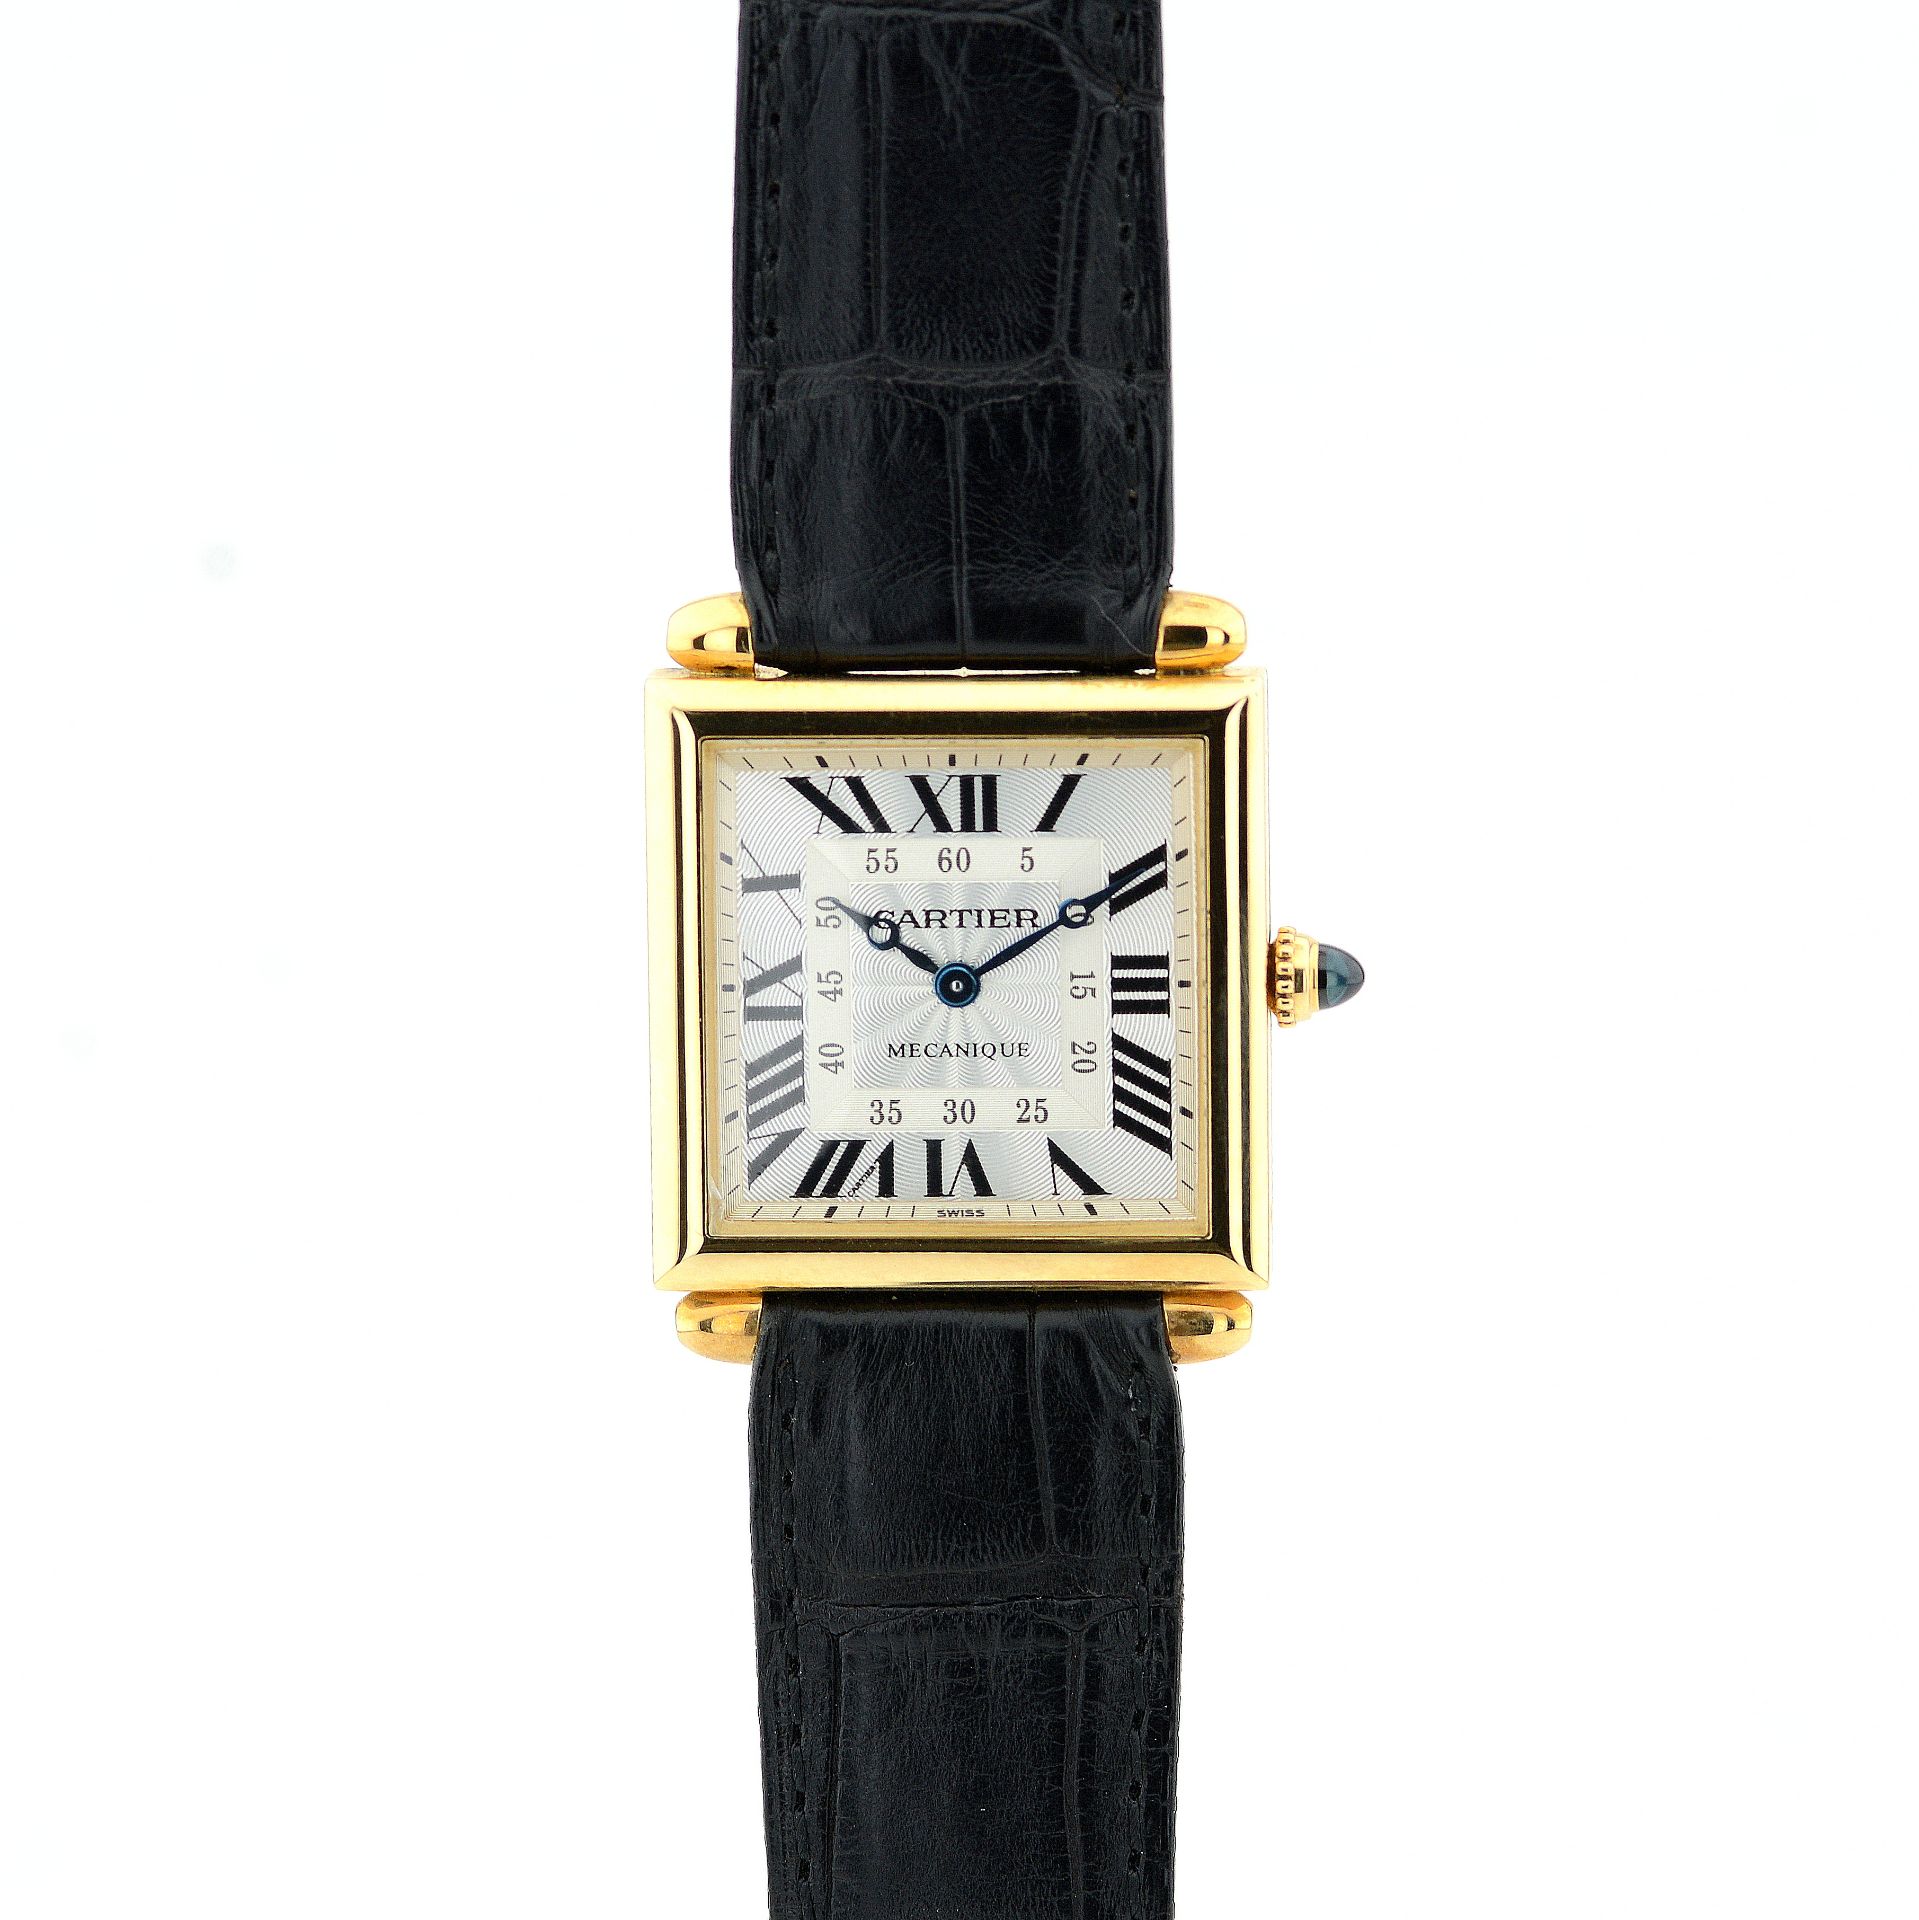 Cartier / Cartier Tank Obus Yellow Gold CPCP Mechanique - Unisex Yellow gold Wrist Watch - Image 4 of 11